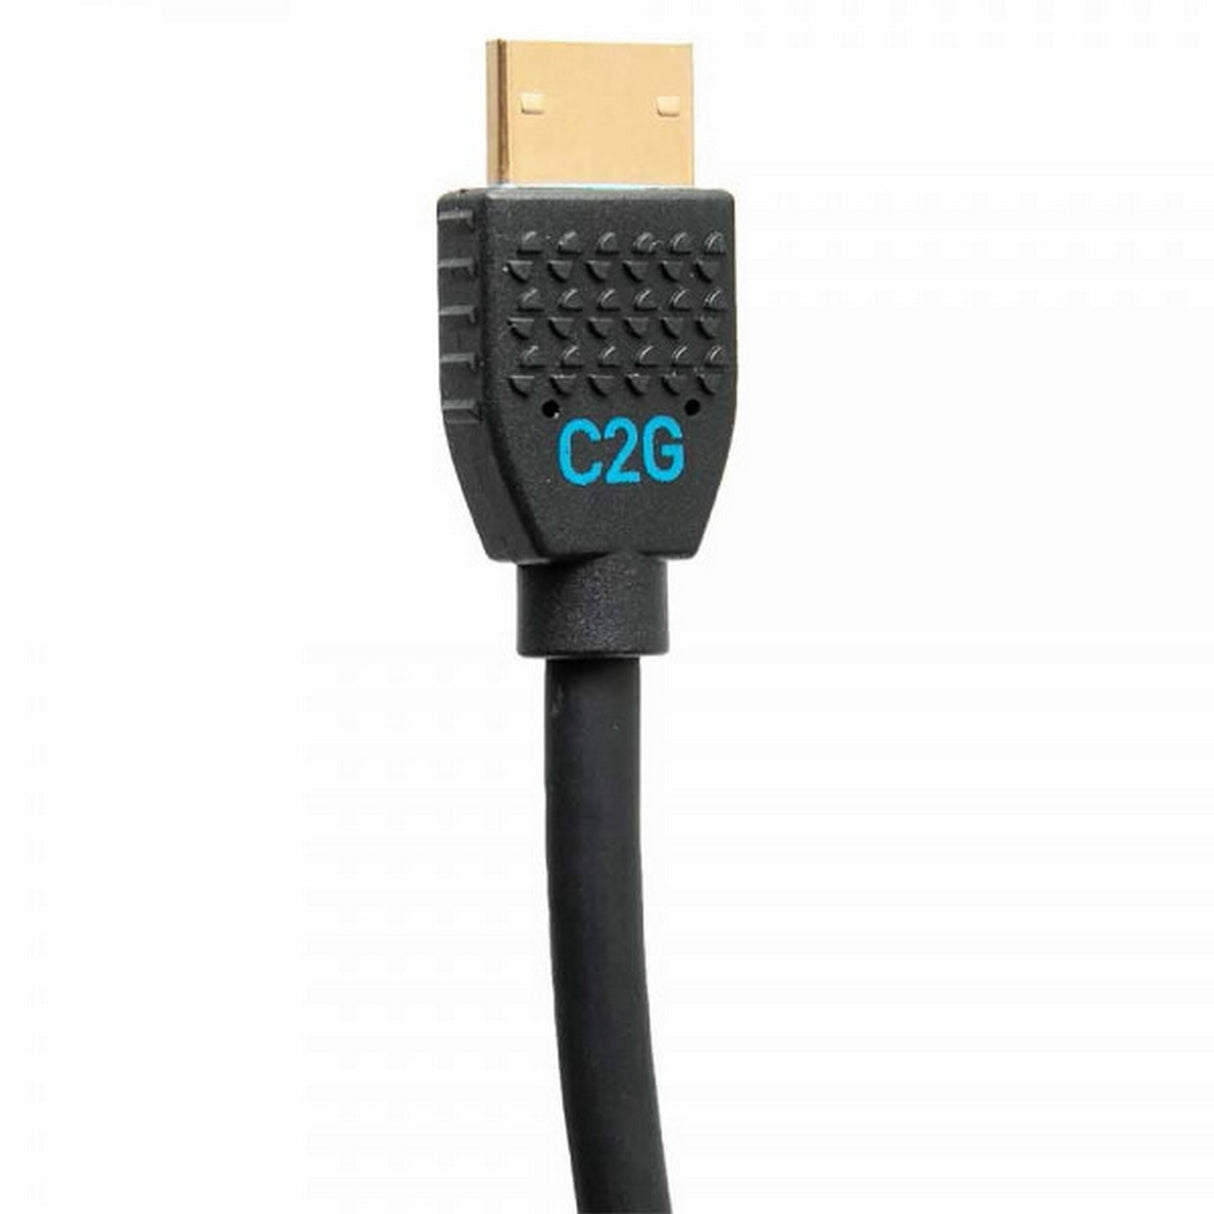 C2G Performance Series Ultra Flexible High Speed HDMI Cable, 4K 60Hz In-Wall, 2 Foot